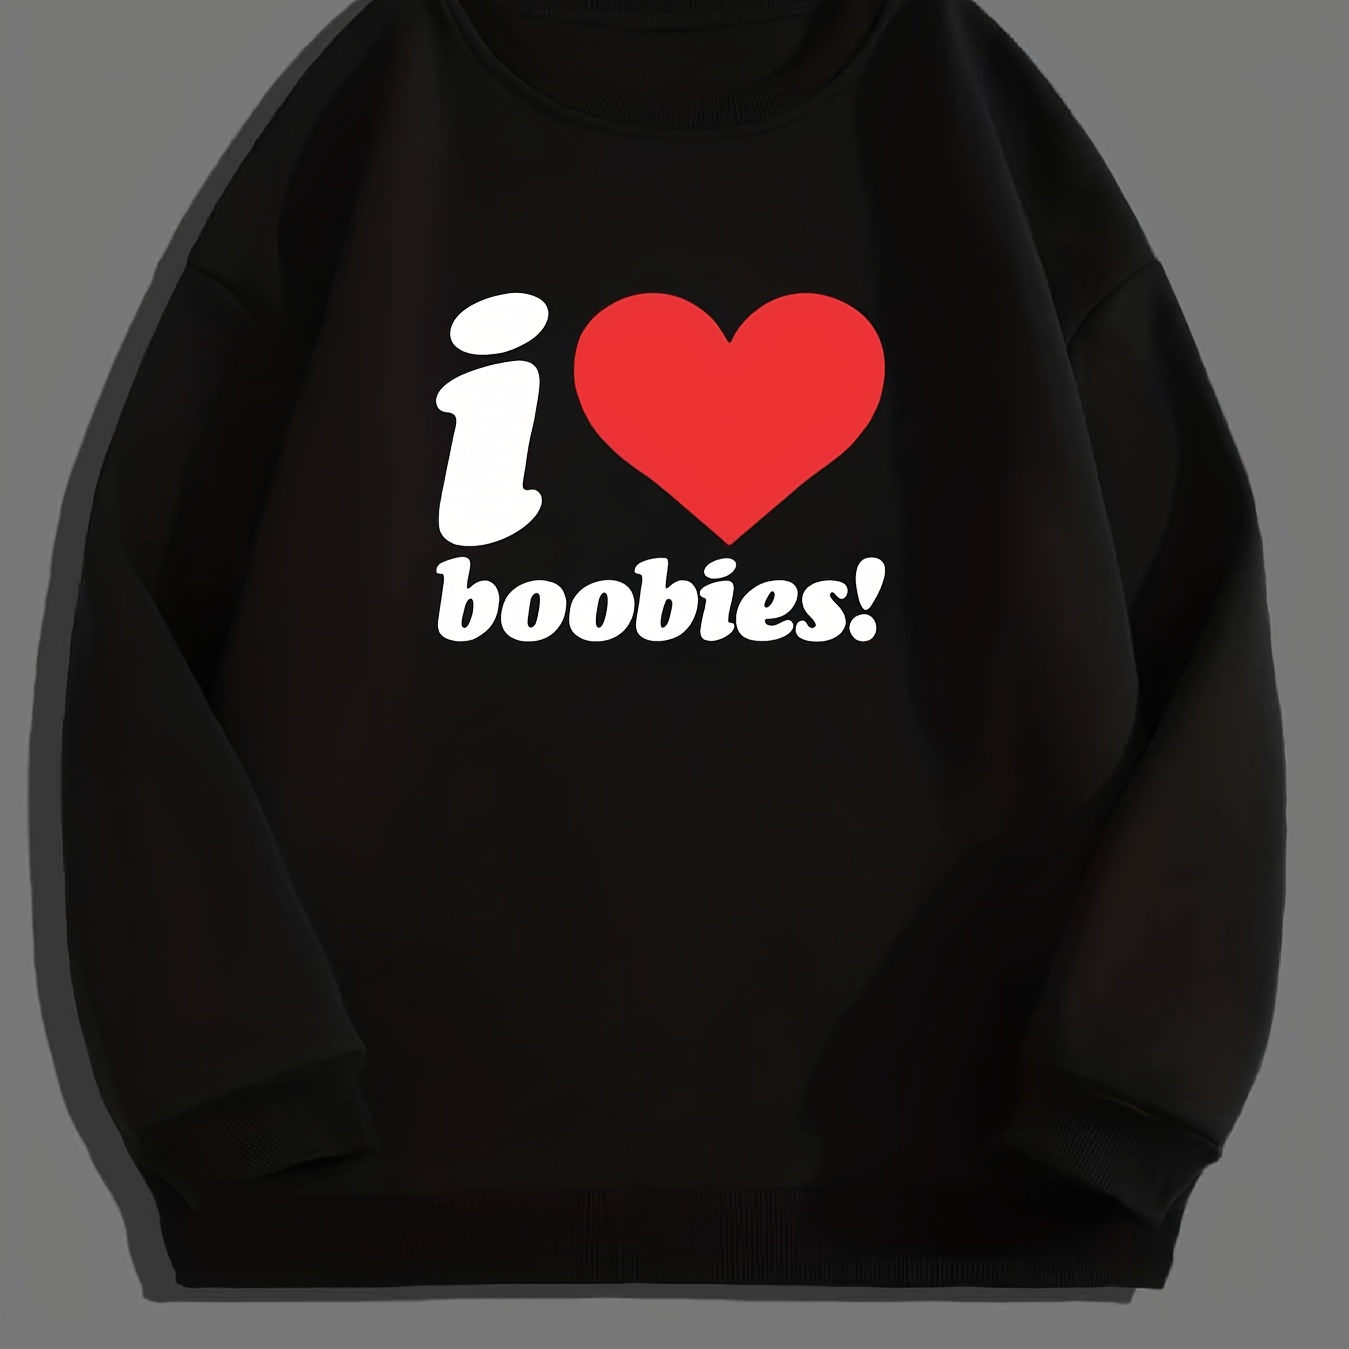 

I Love Boobies! Print, Sweatshirt With Long Sleeve, Men's Creative Slightly Flex Crew Neck Pullover For Spring Fall And Winter